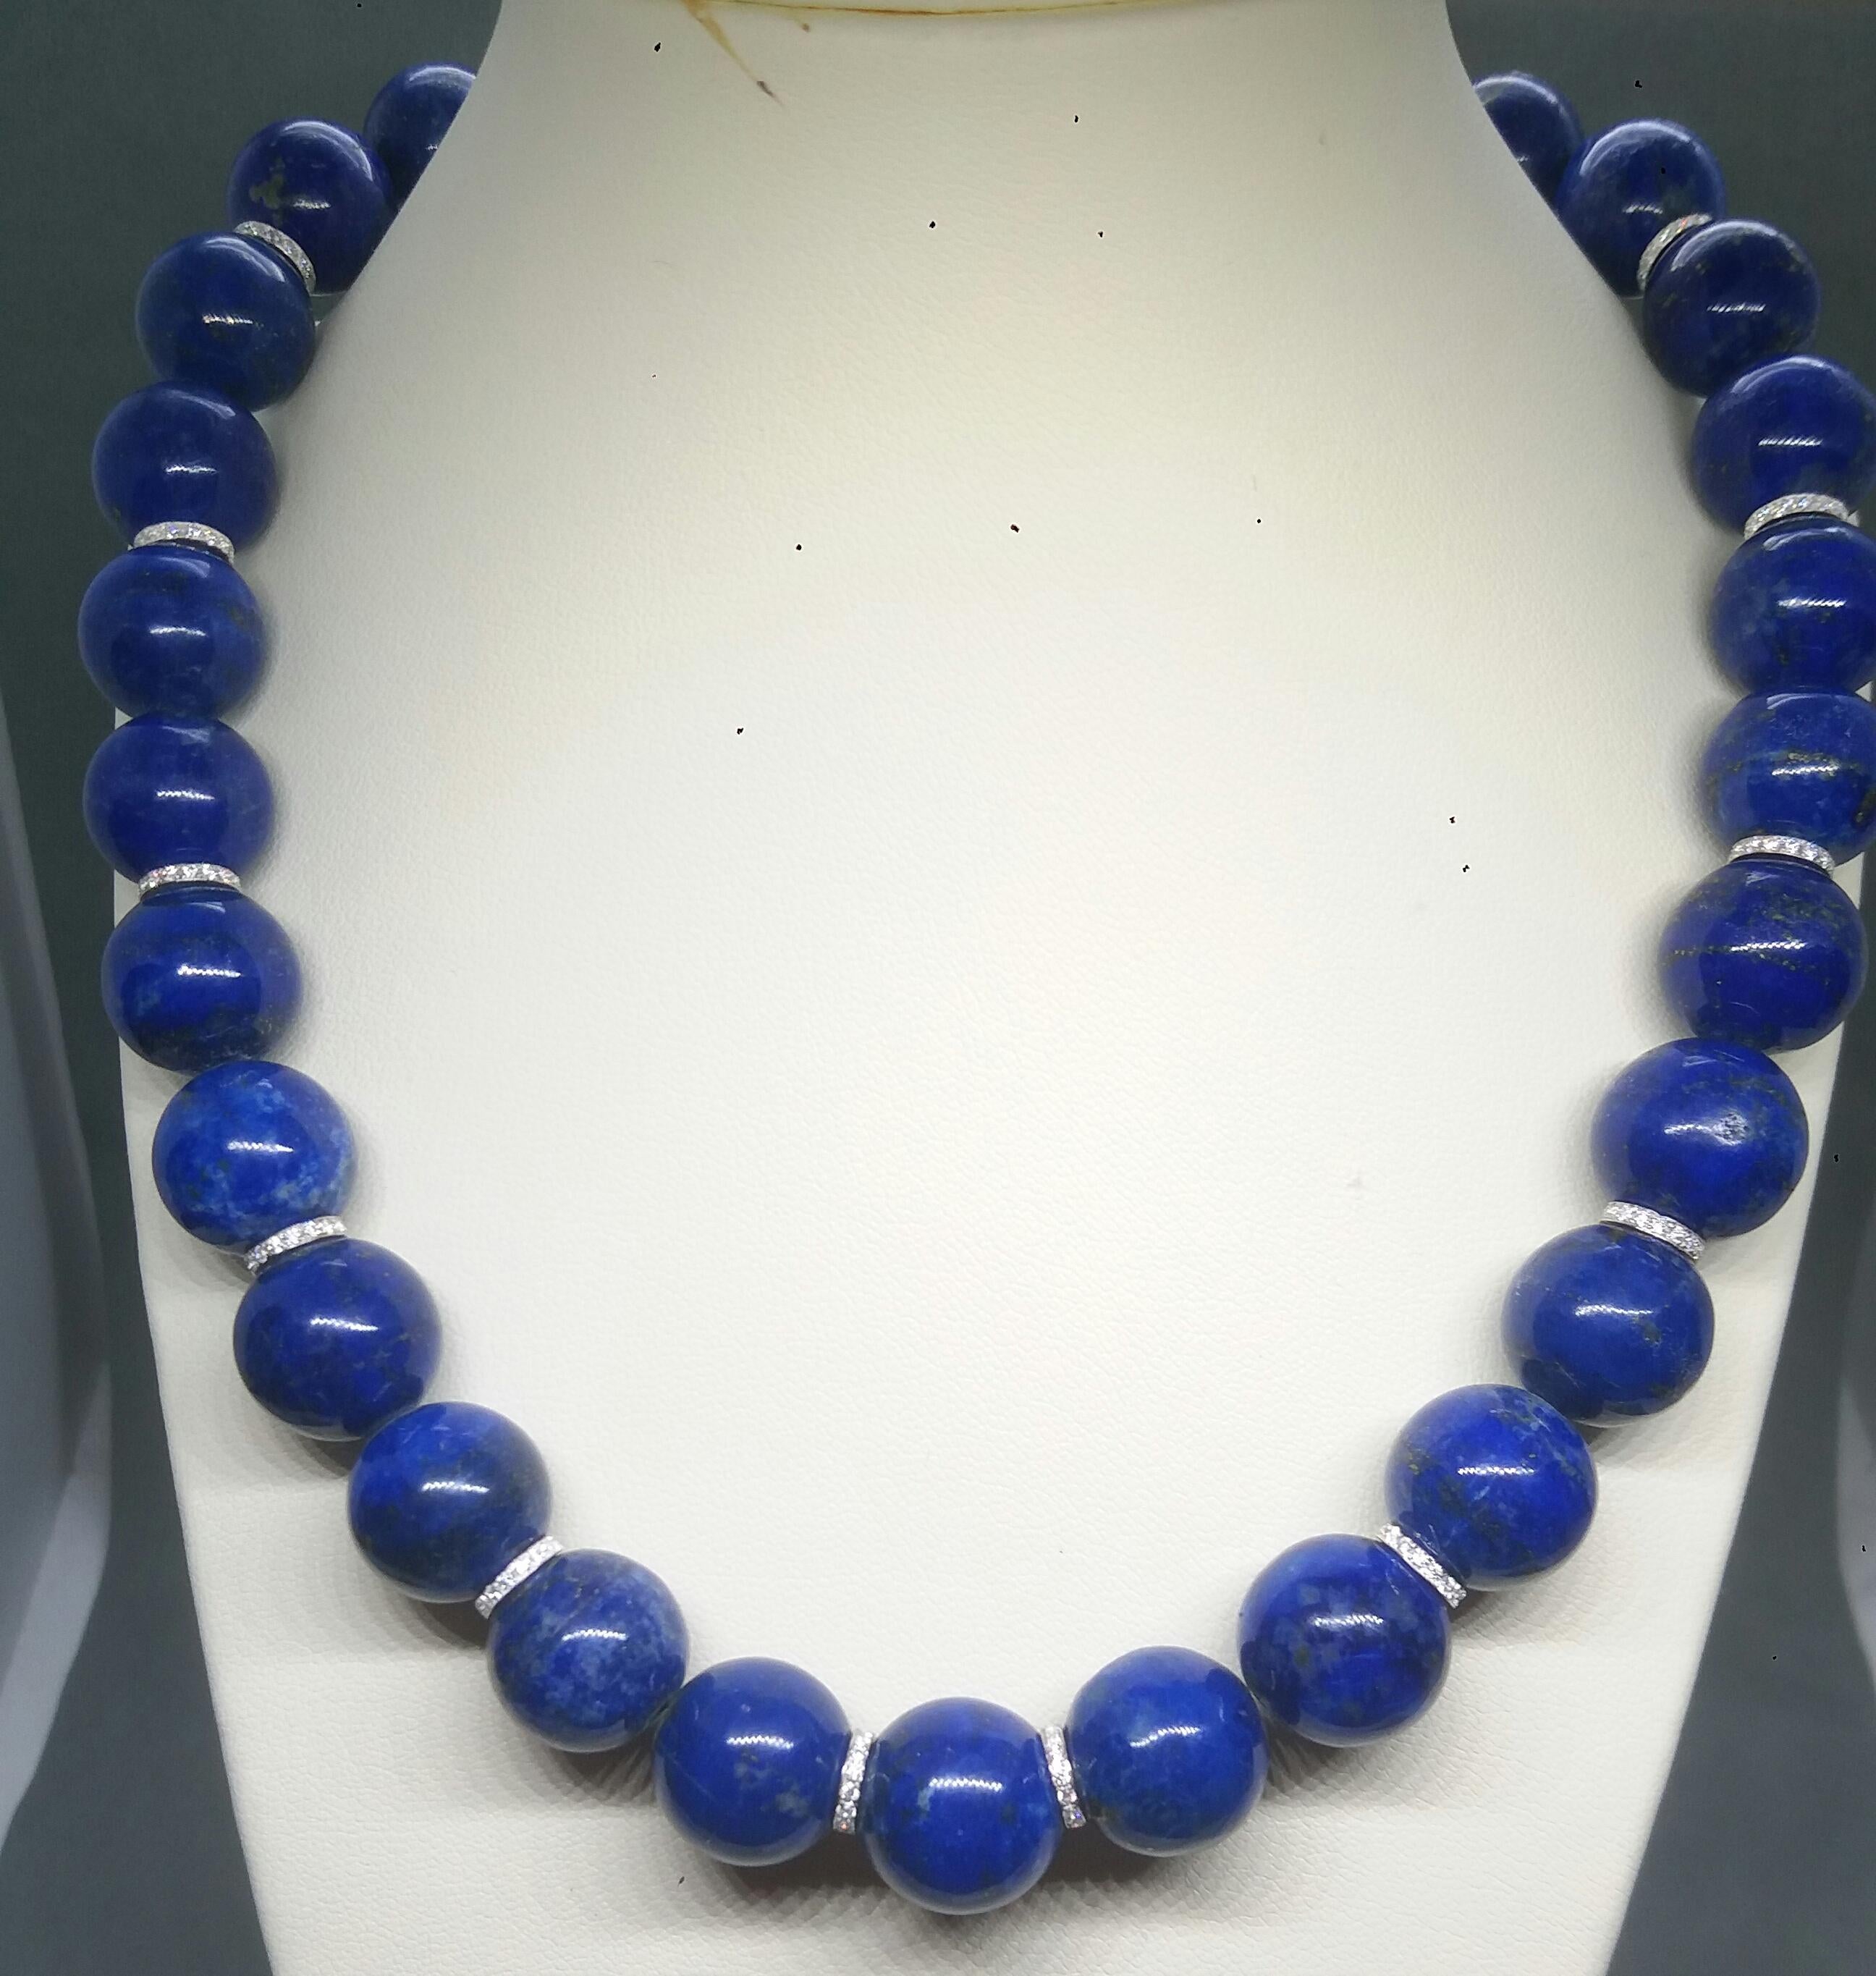 Round Cut Natural Lapis Lazuli Beads Necklace 14 K White Gold Diamonds Spacers And Clasp For Sale